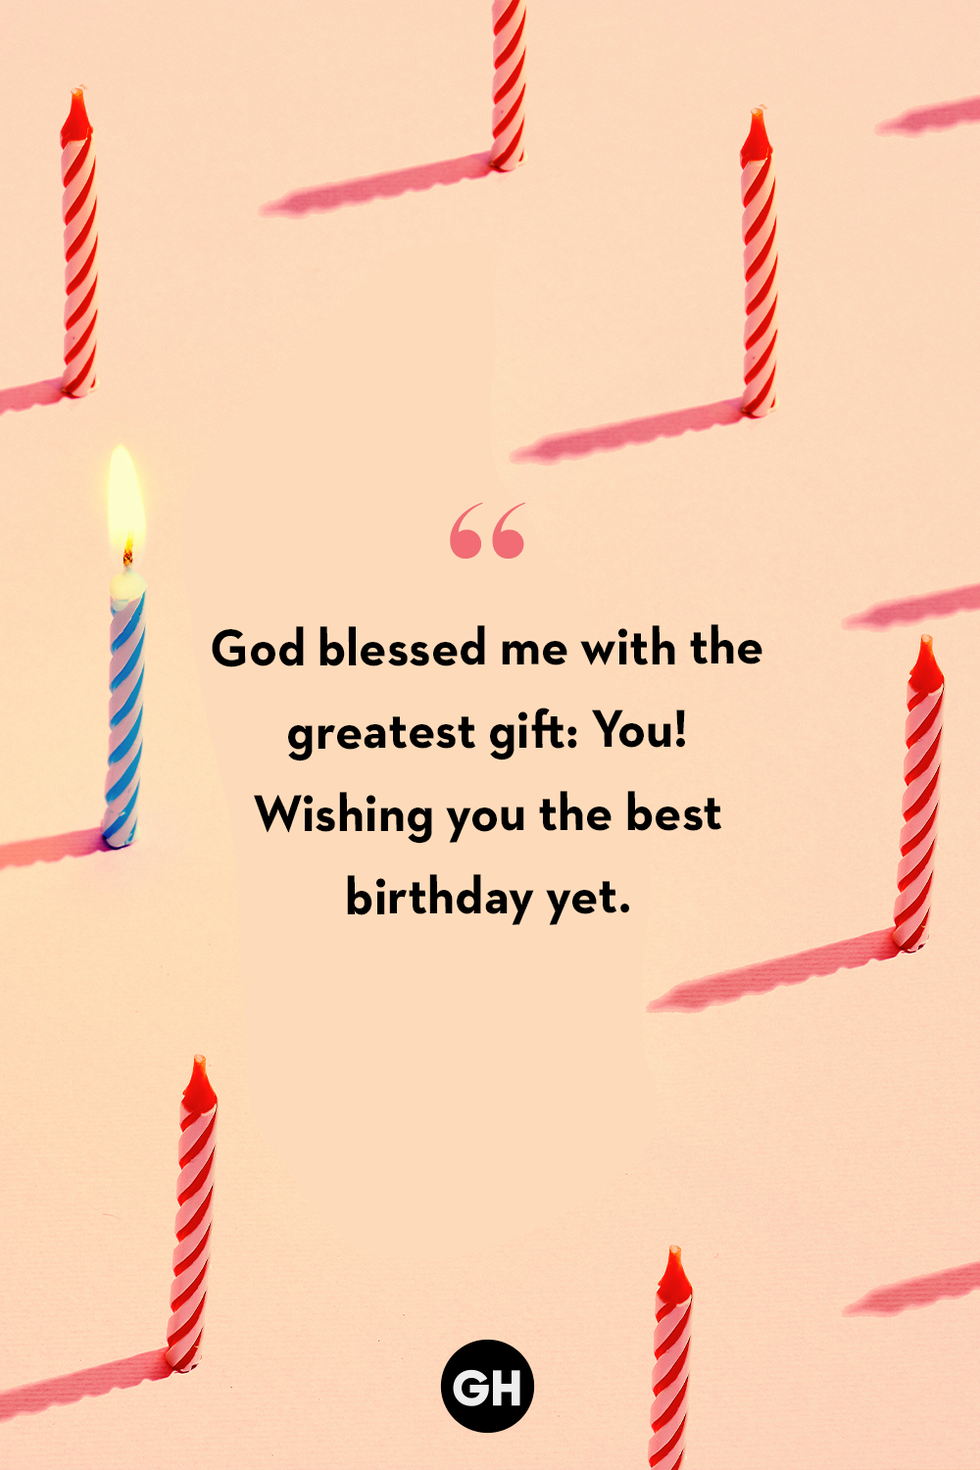 huge-collection-of-full-4k-happy-birthday-images-with-quotes-top-999-incredible-selection-of